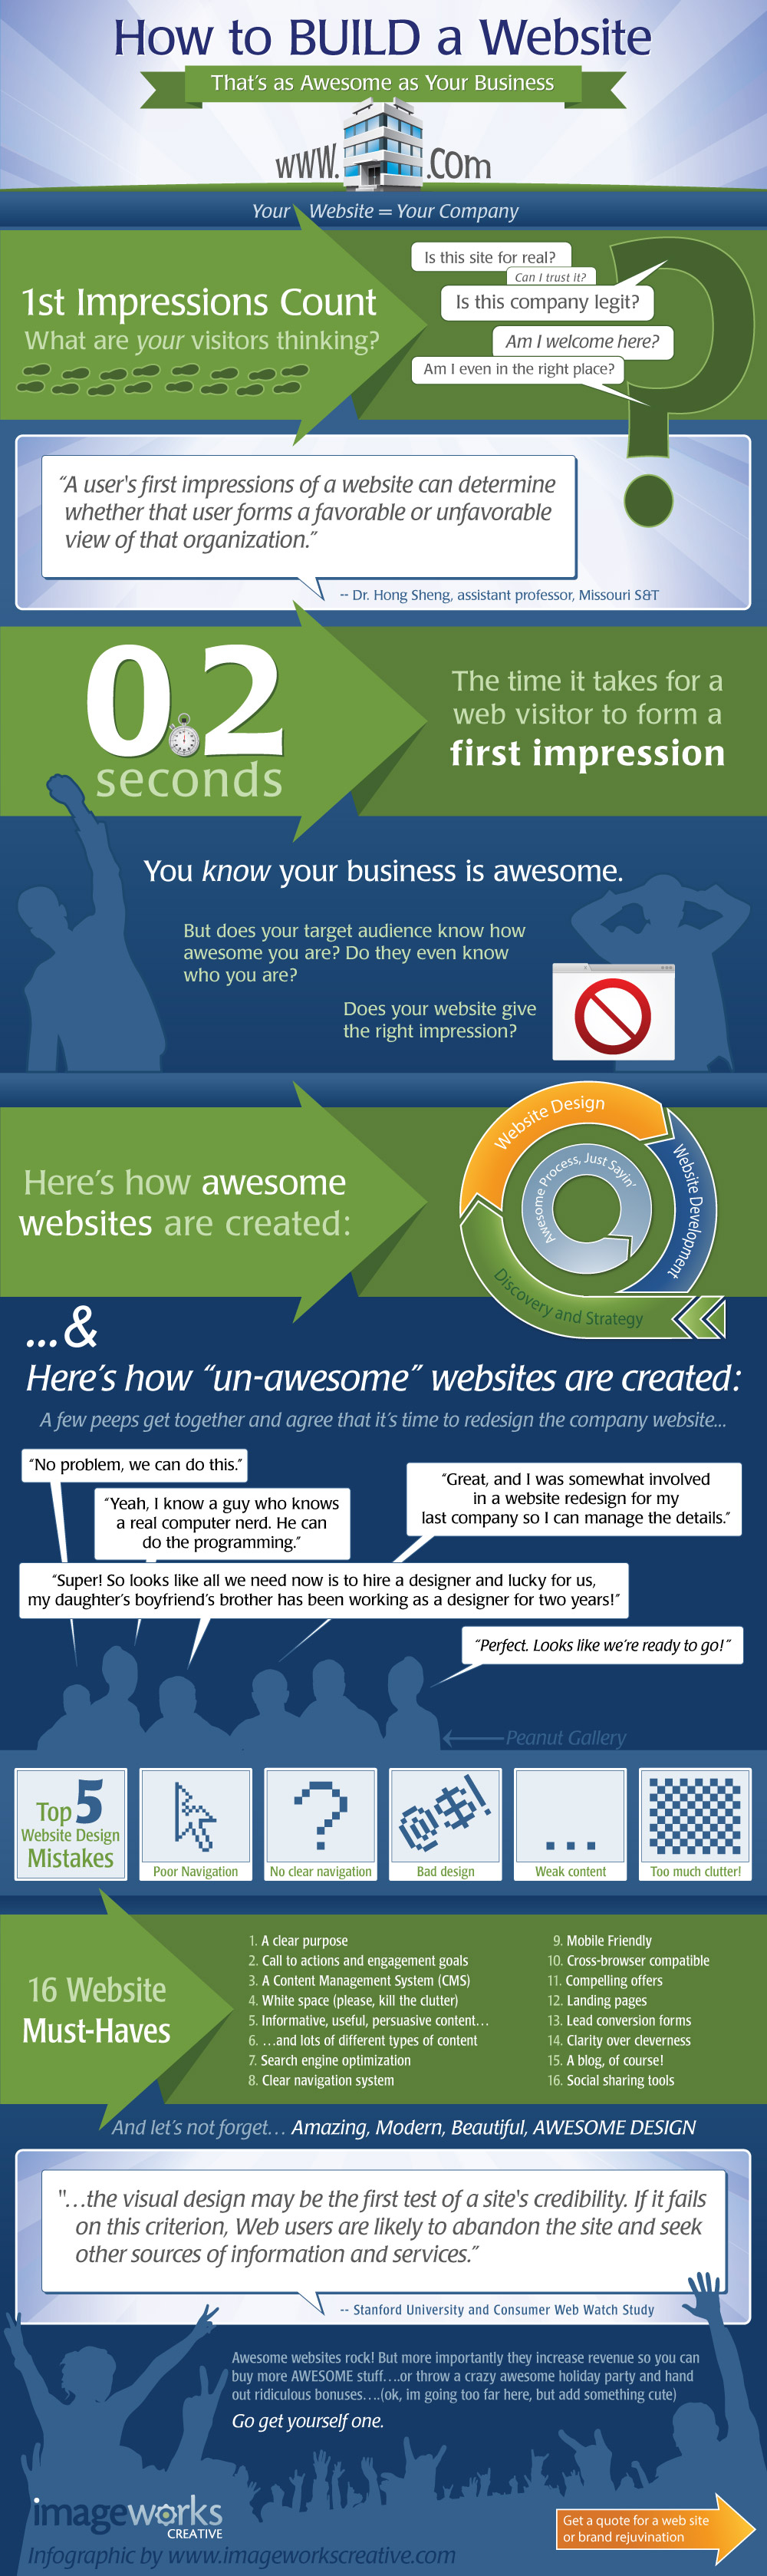 How to Build a Website as Awesome as Your Business